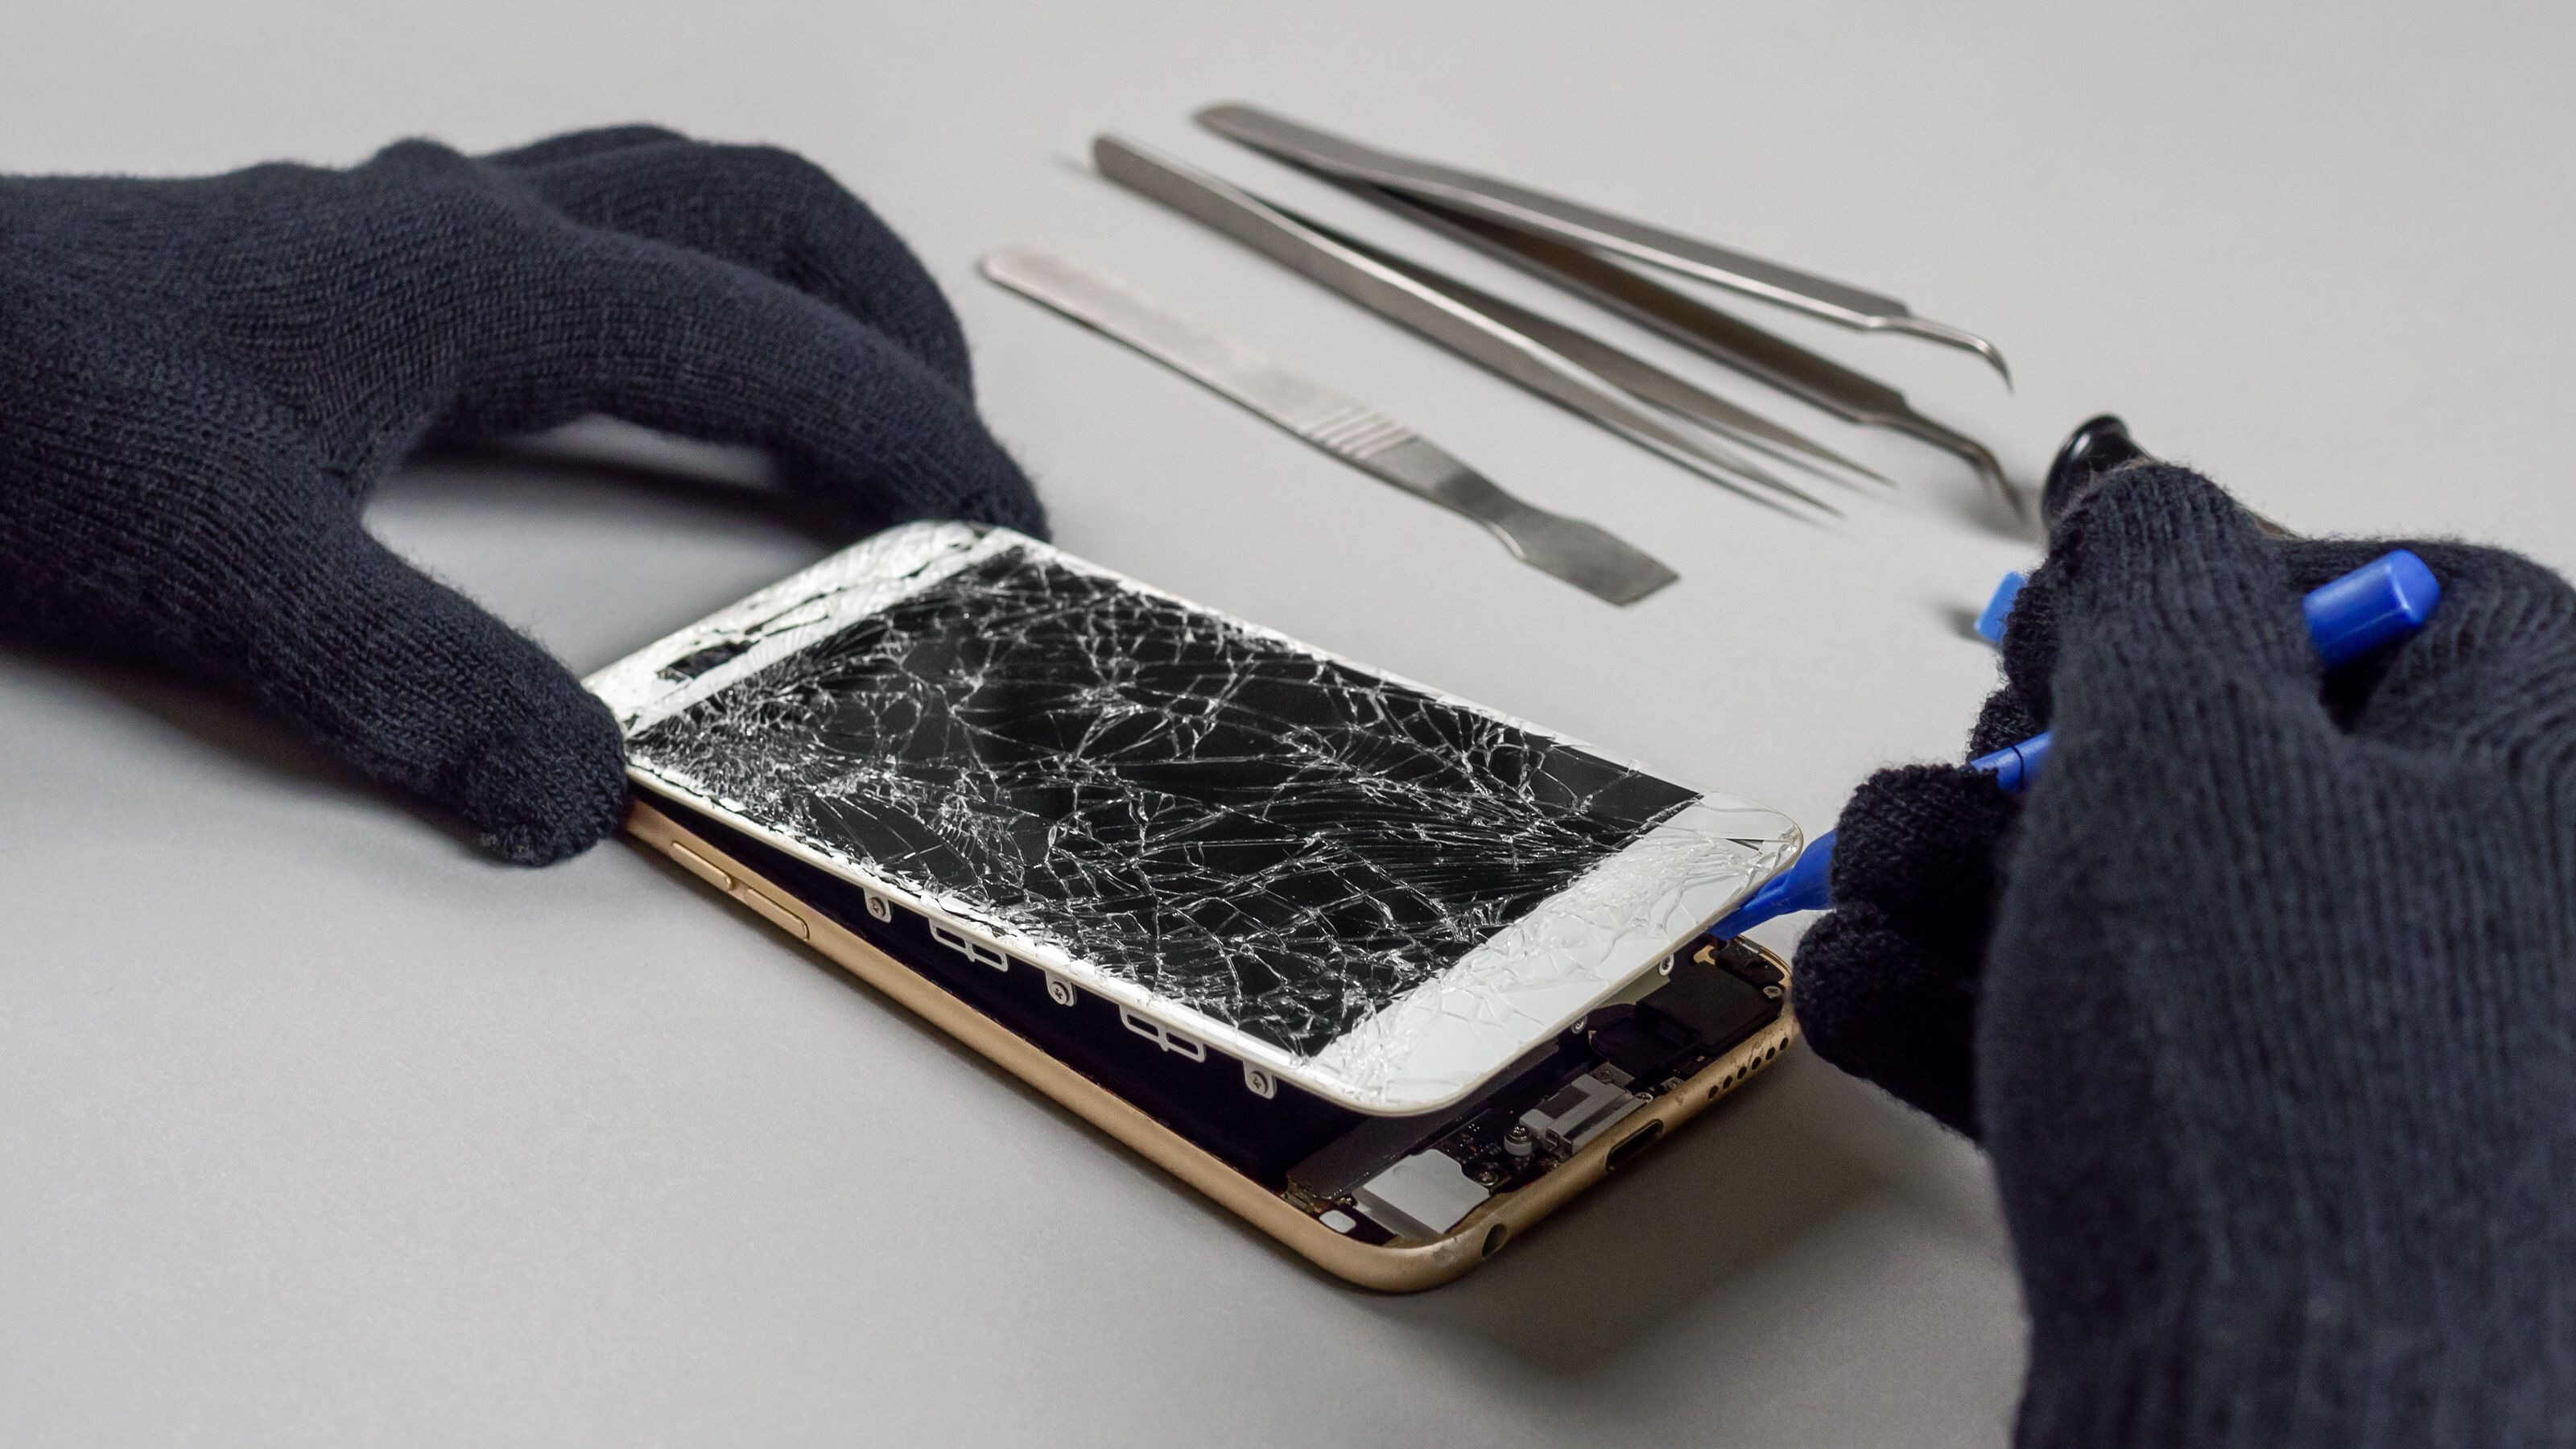 amex-adds-1600-phone-damage-protection-to-its-credit-cards